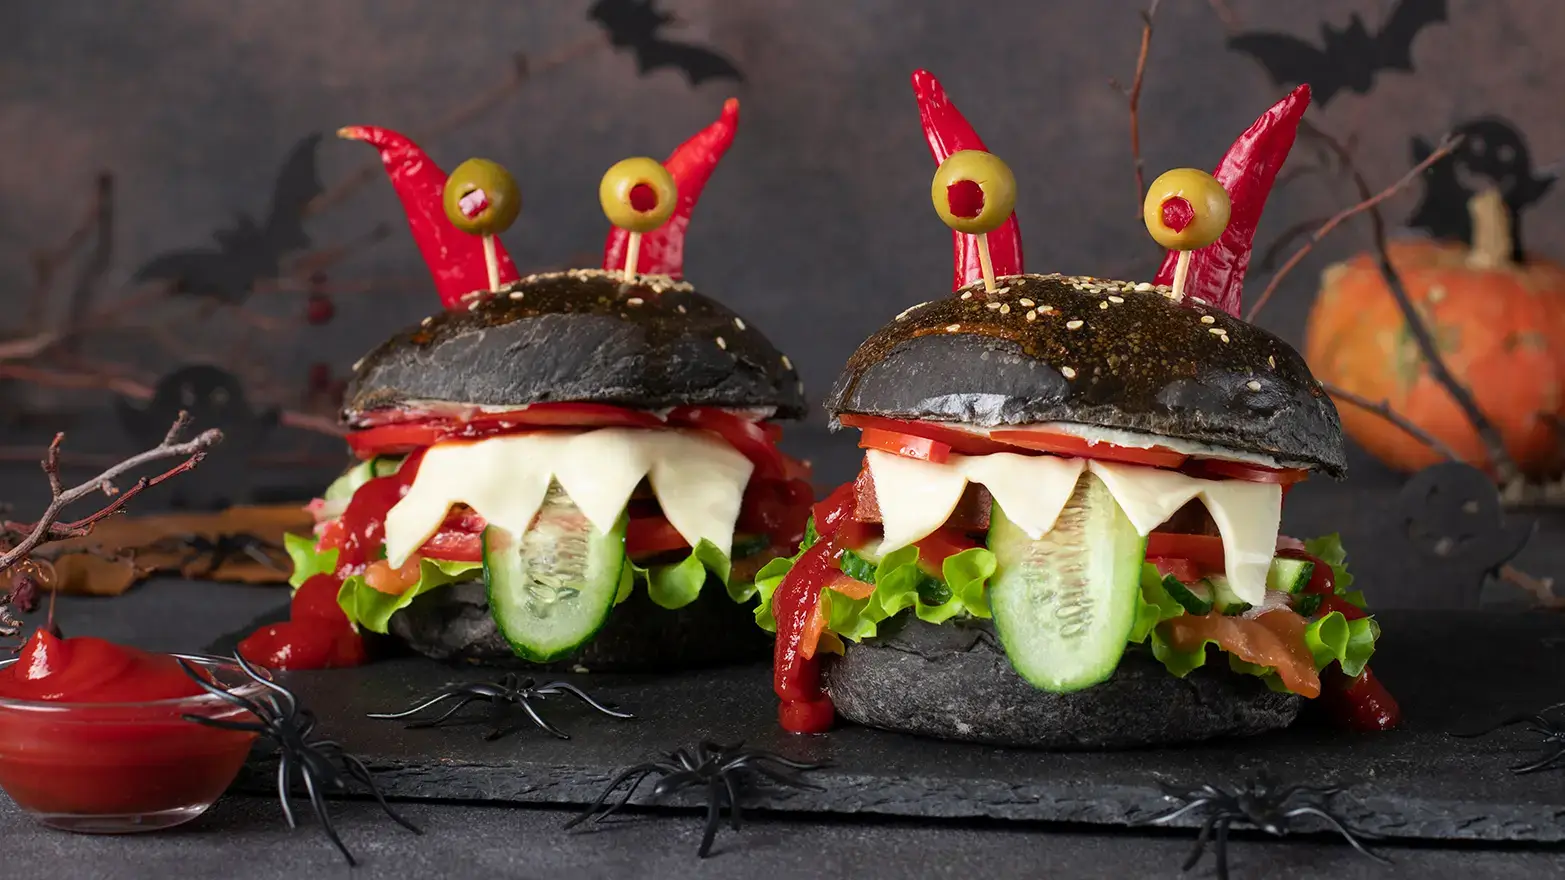 Monster burgers with black buns, olive eyes, and jagged cheese teeth